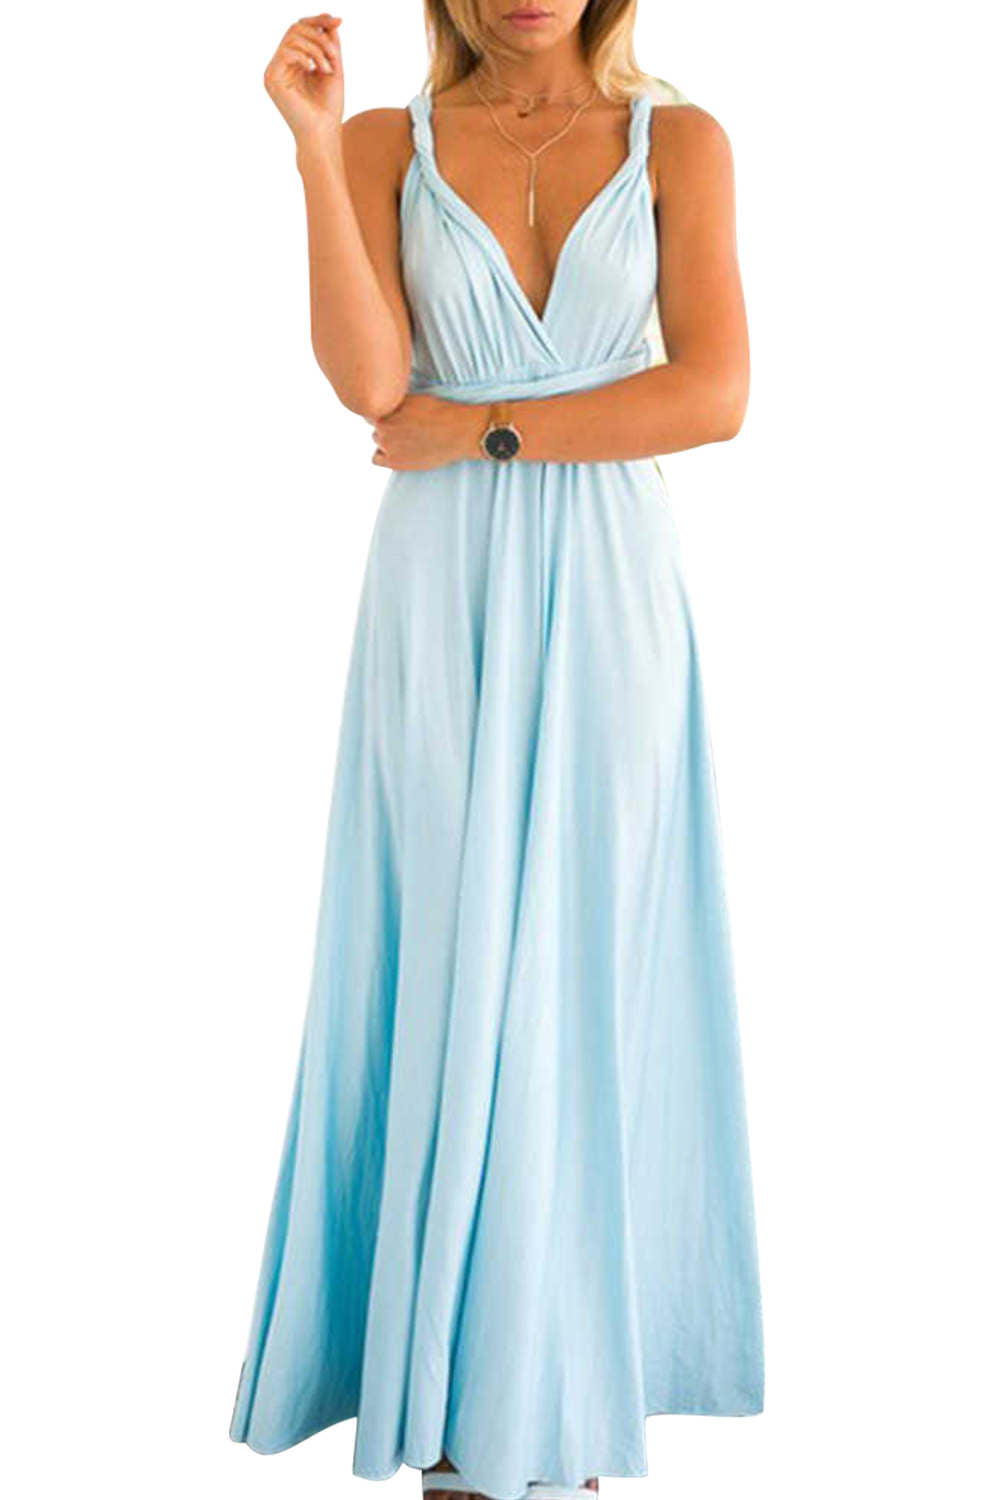 Iyasson Backless Front-Slit Cheap Long Prom Dress